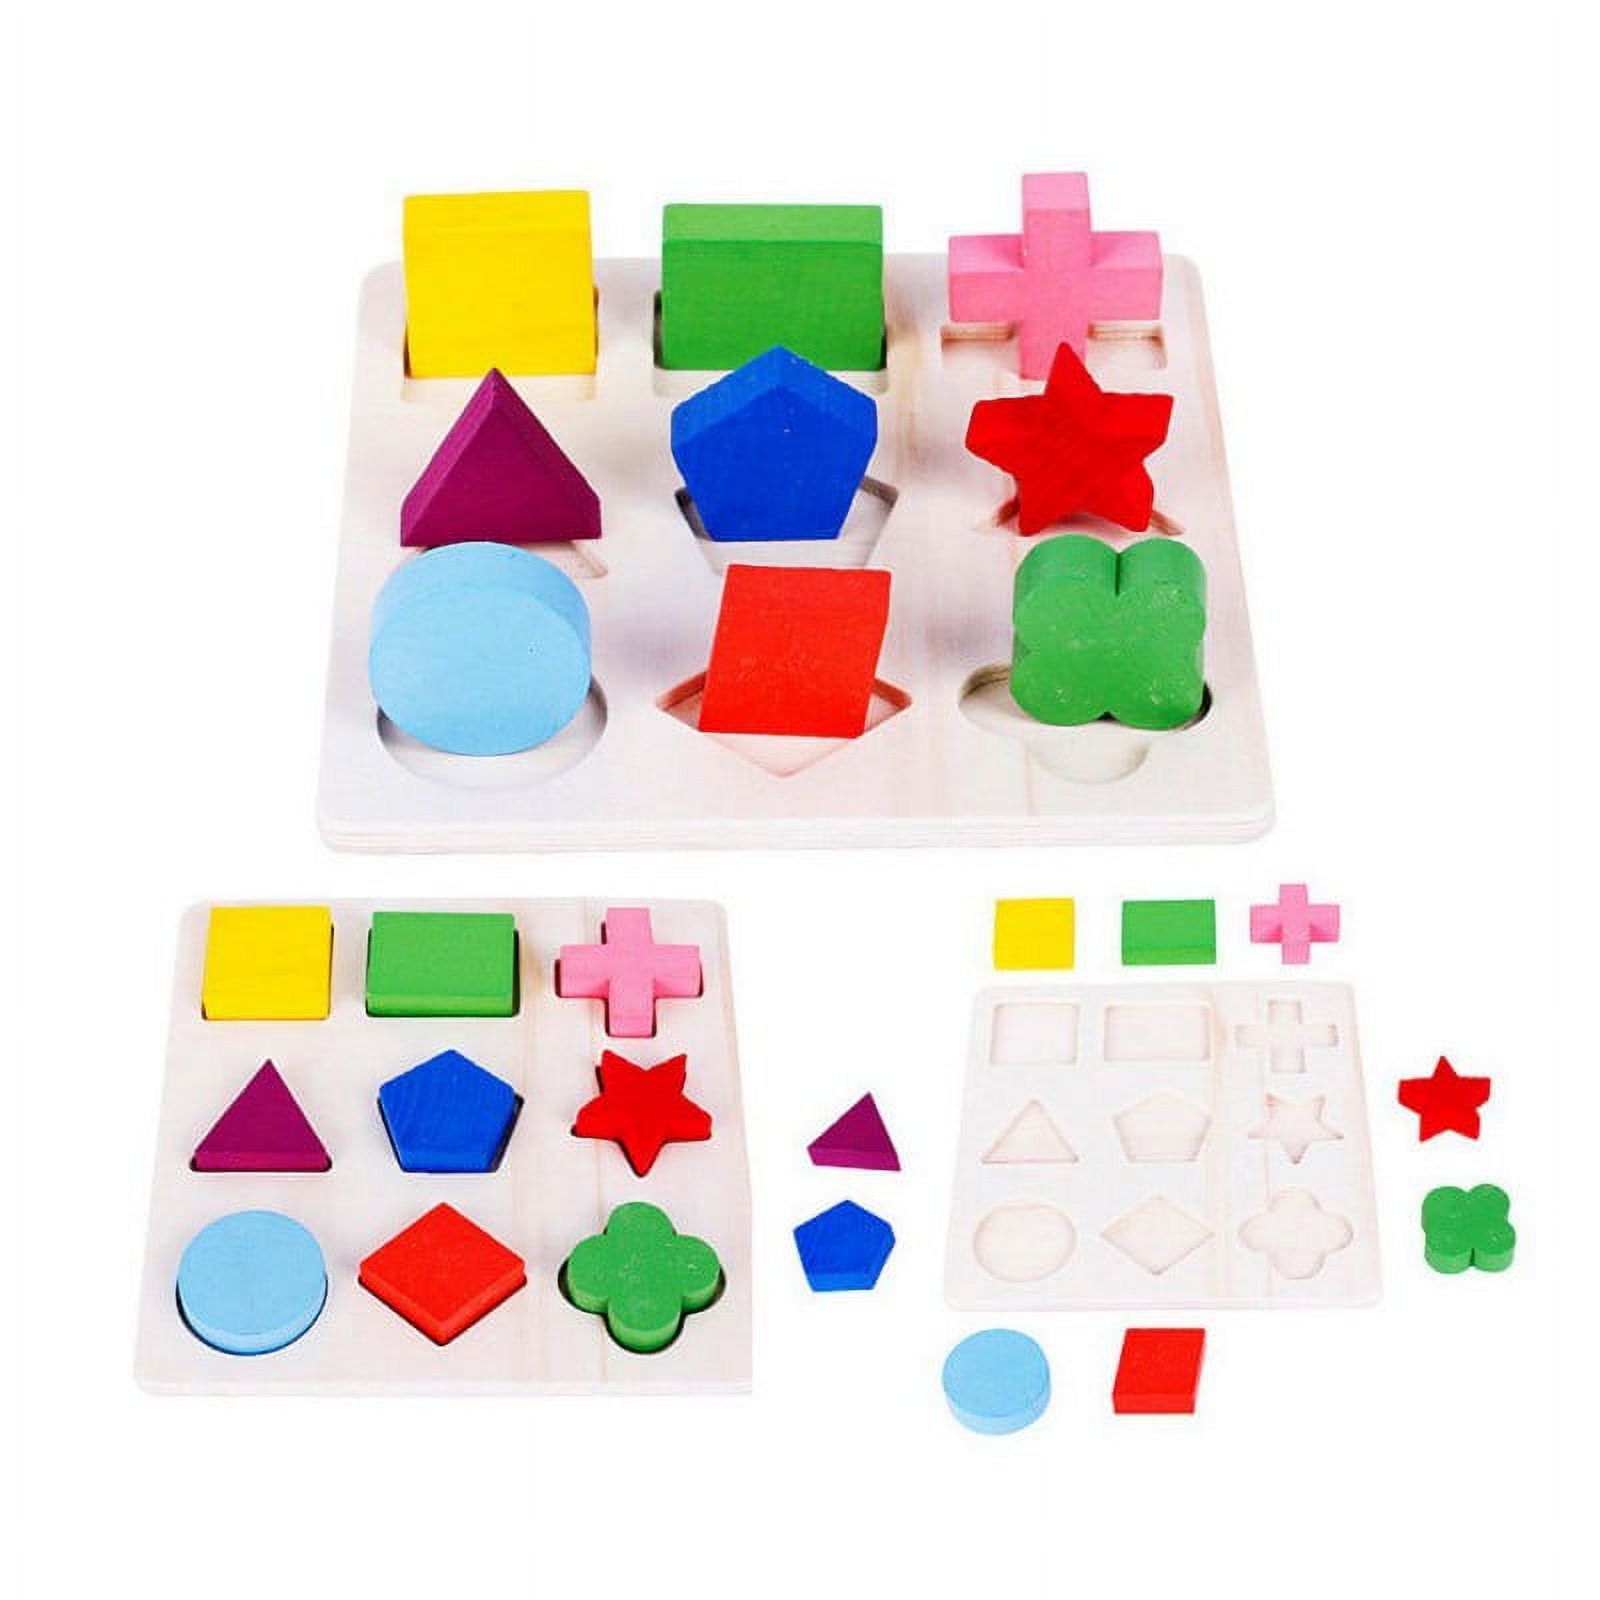 Kids Baby Wooden Geometry Block Puzzle Montessori Early Learning Educational Toy - image 3 of 5